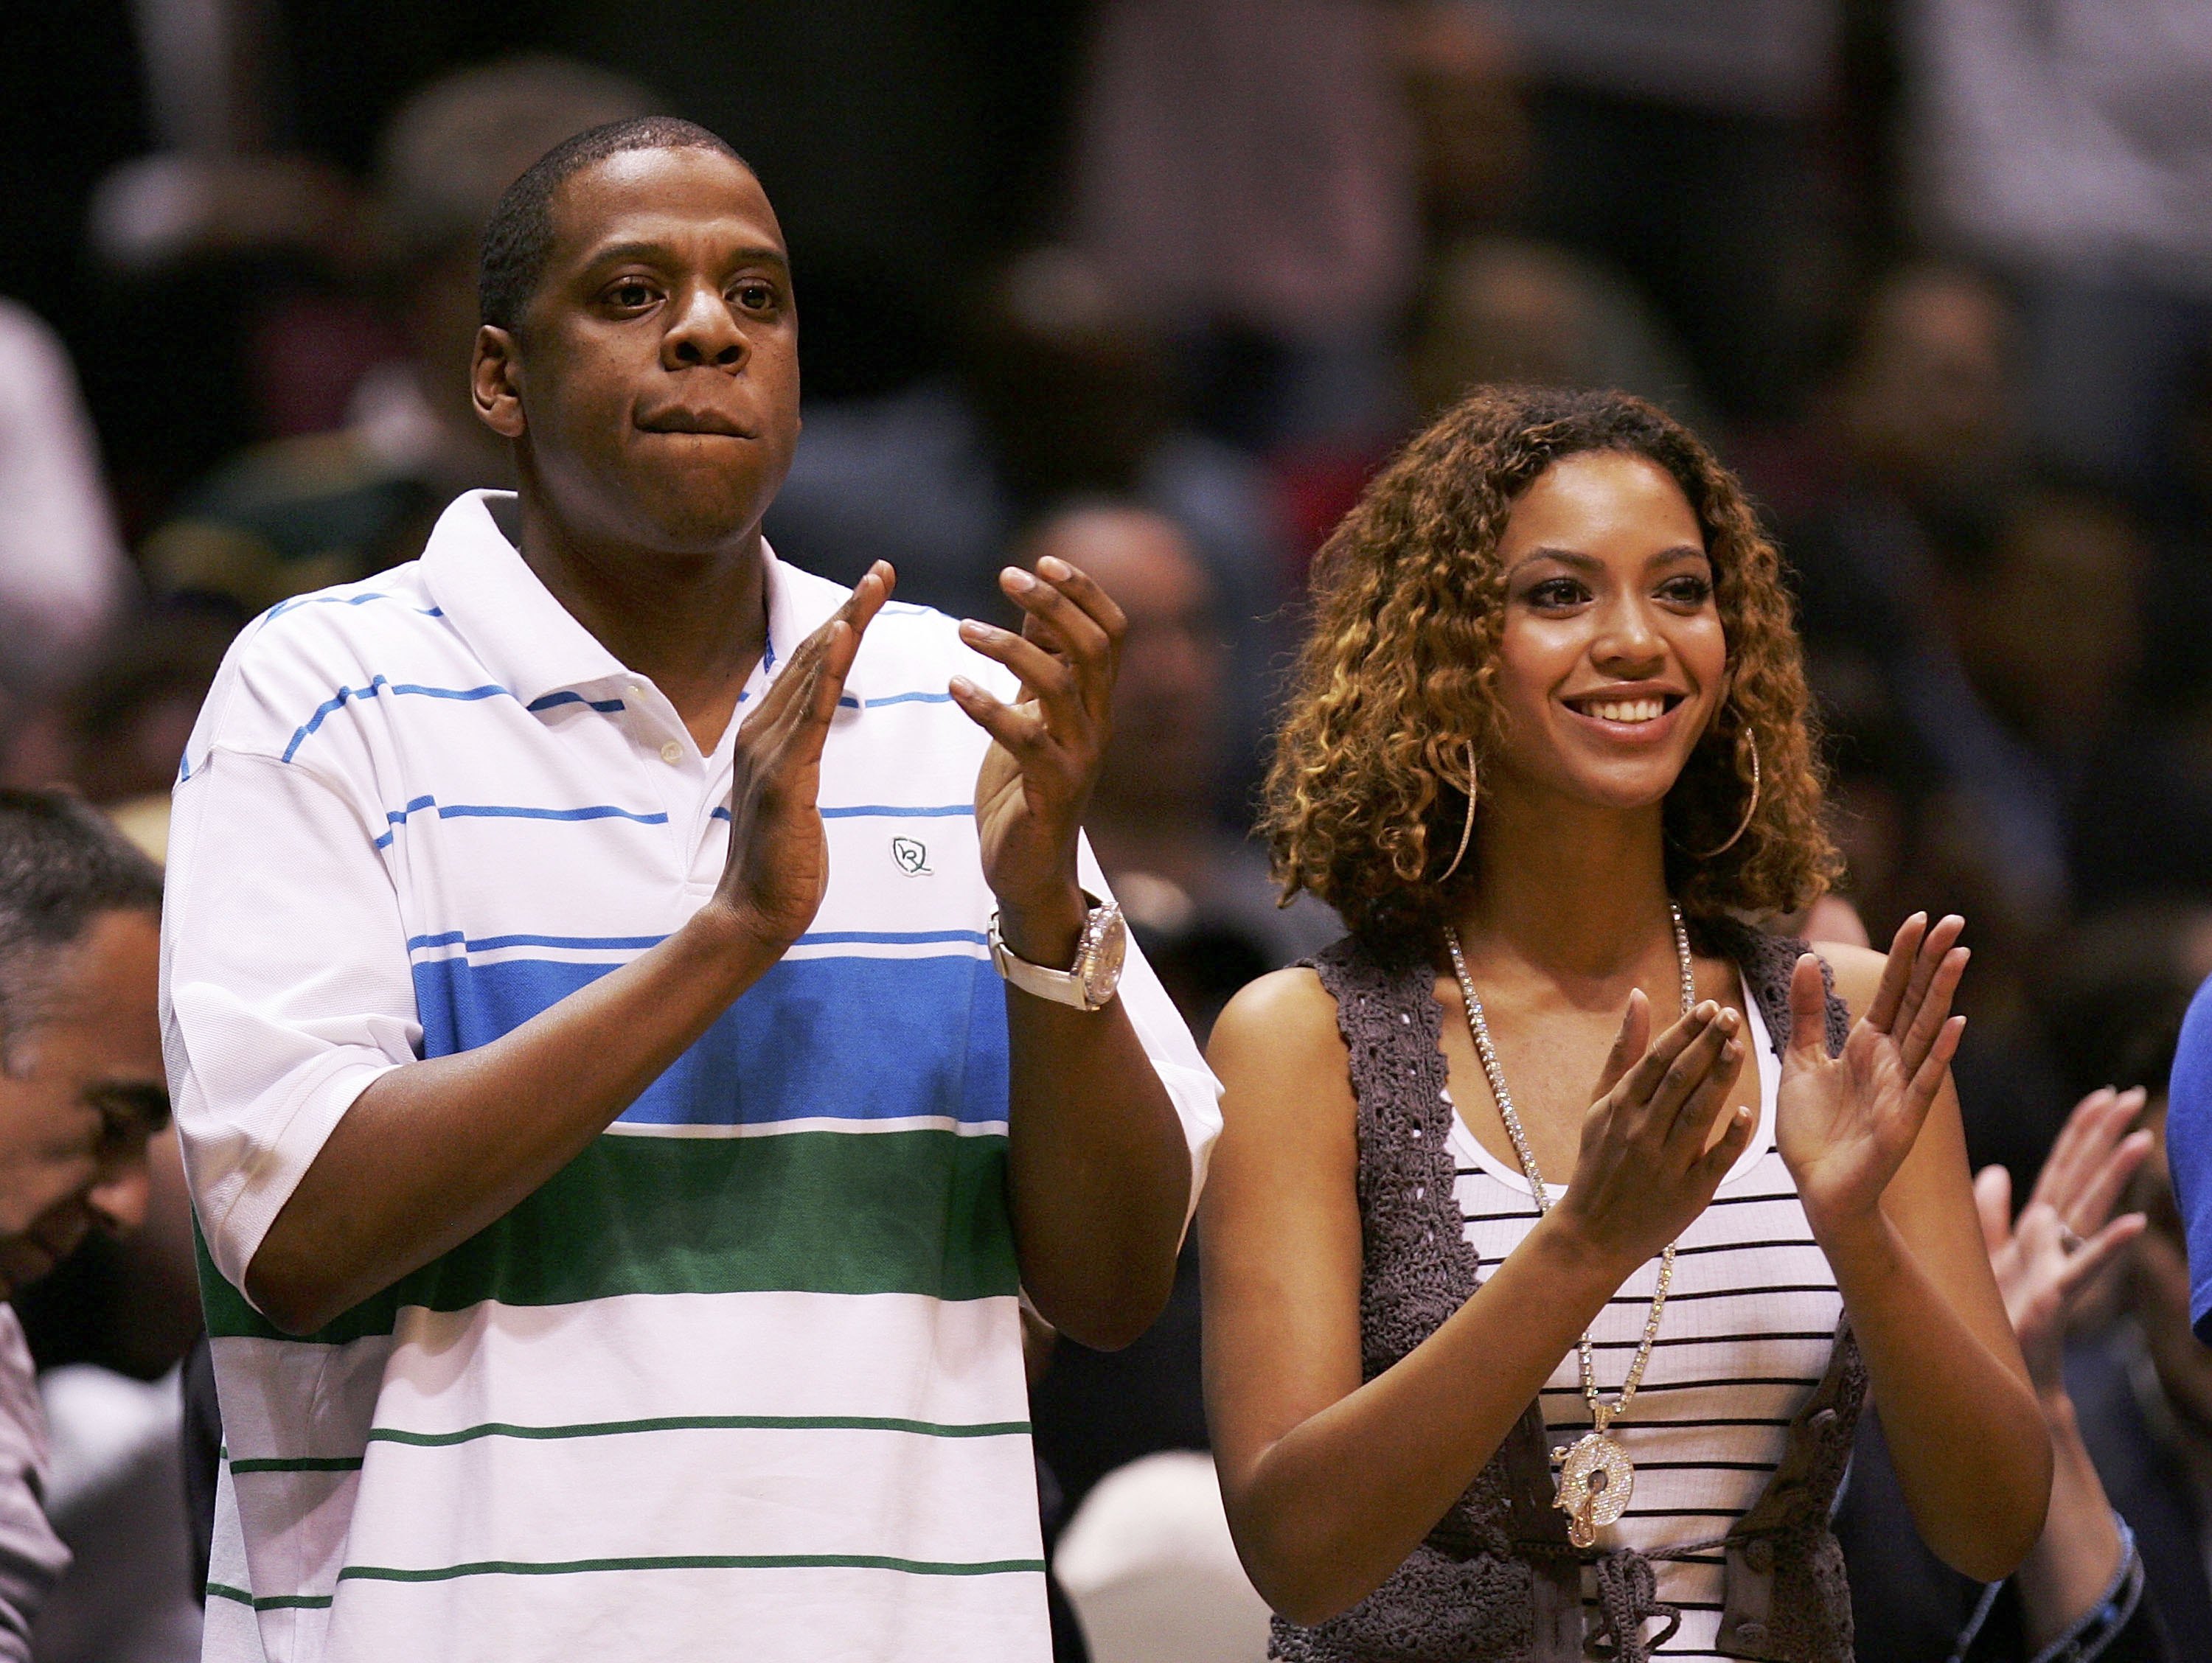 Jay-Z and singer Beyonce Knowles